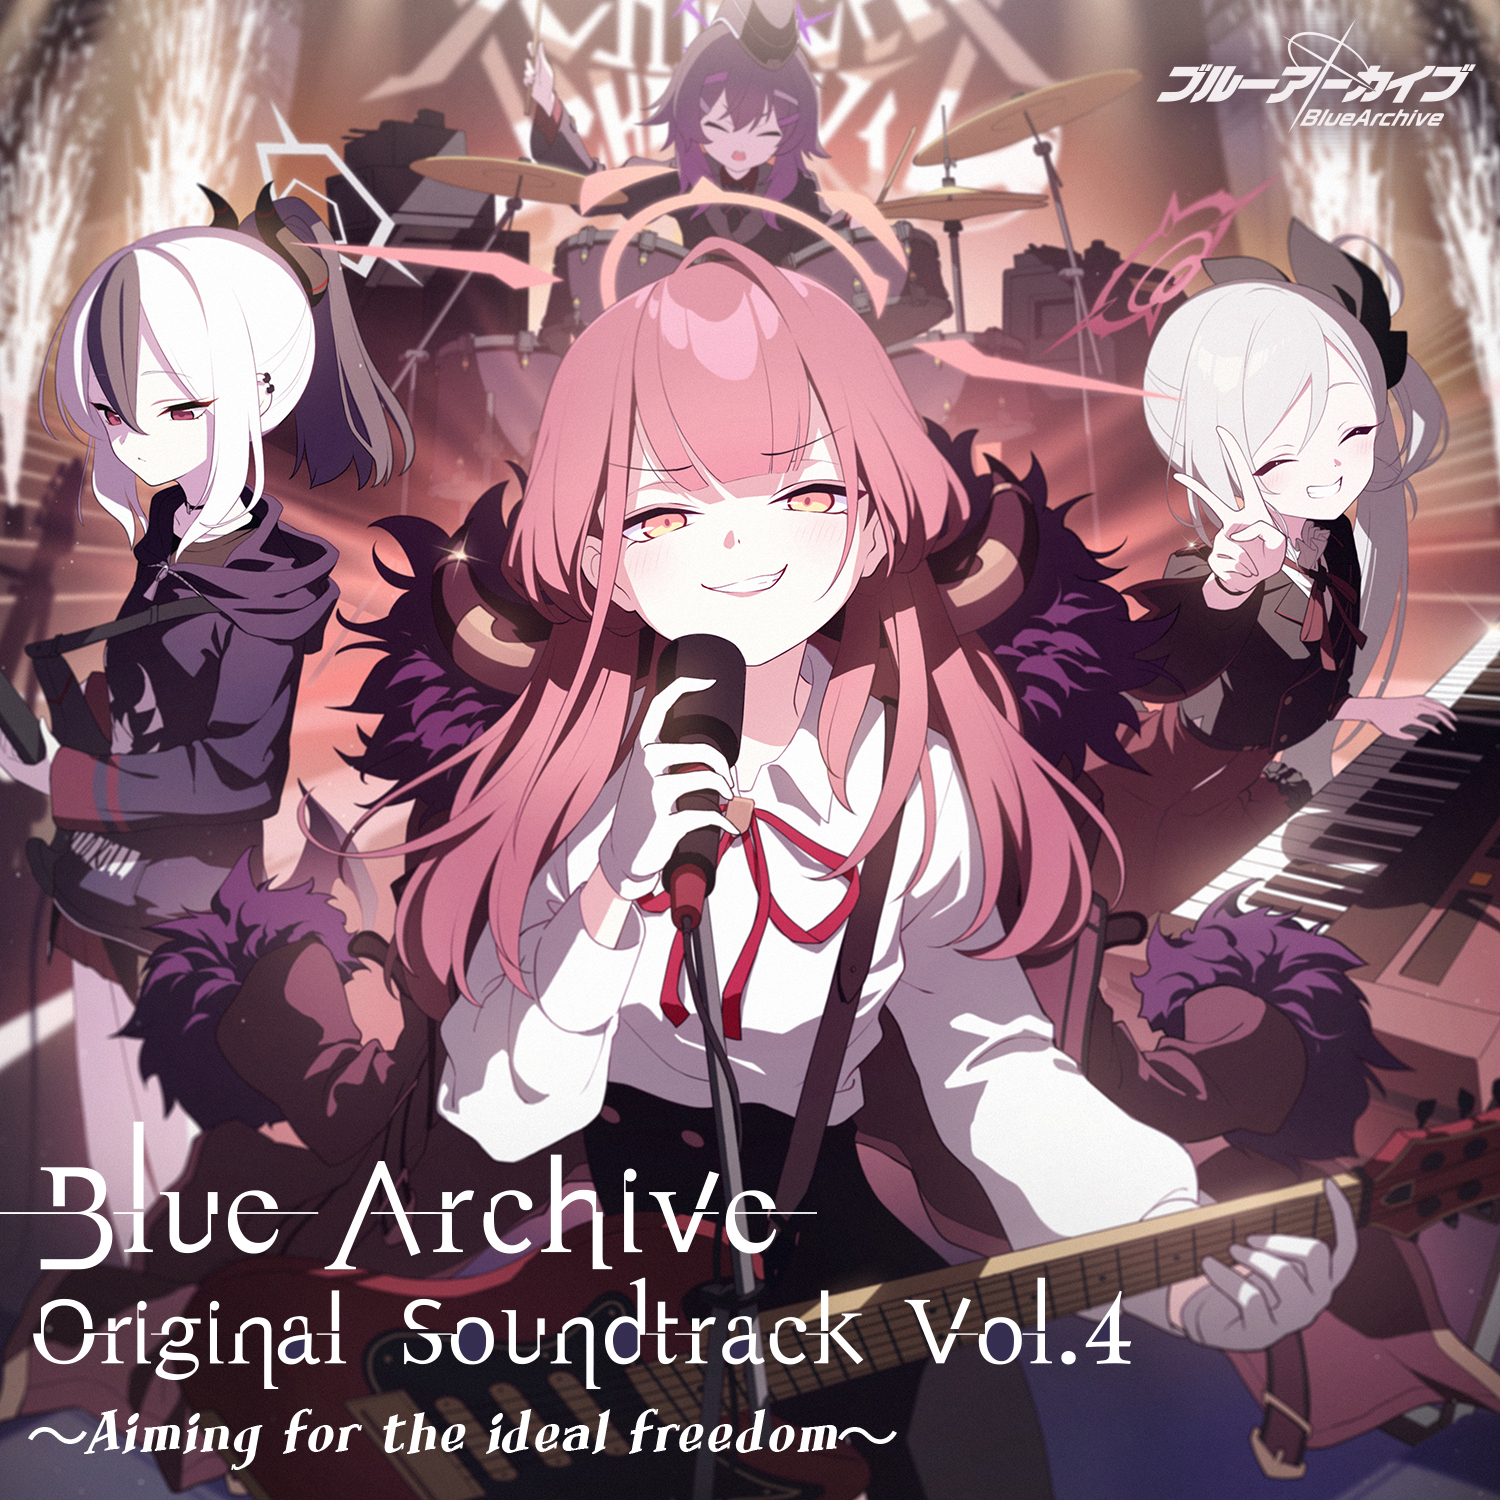 【FLAC】ゲーム「ブルーアーカイブ -Blue Archive-」Original Sound Track Vol.4「~Aiming for the ideal freedom~」／株式会社Yostar